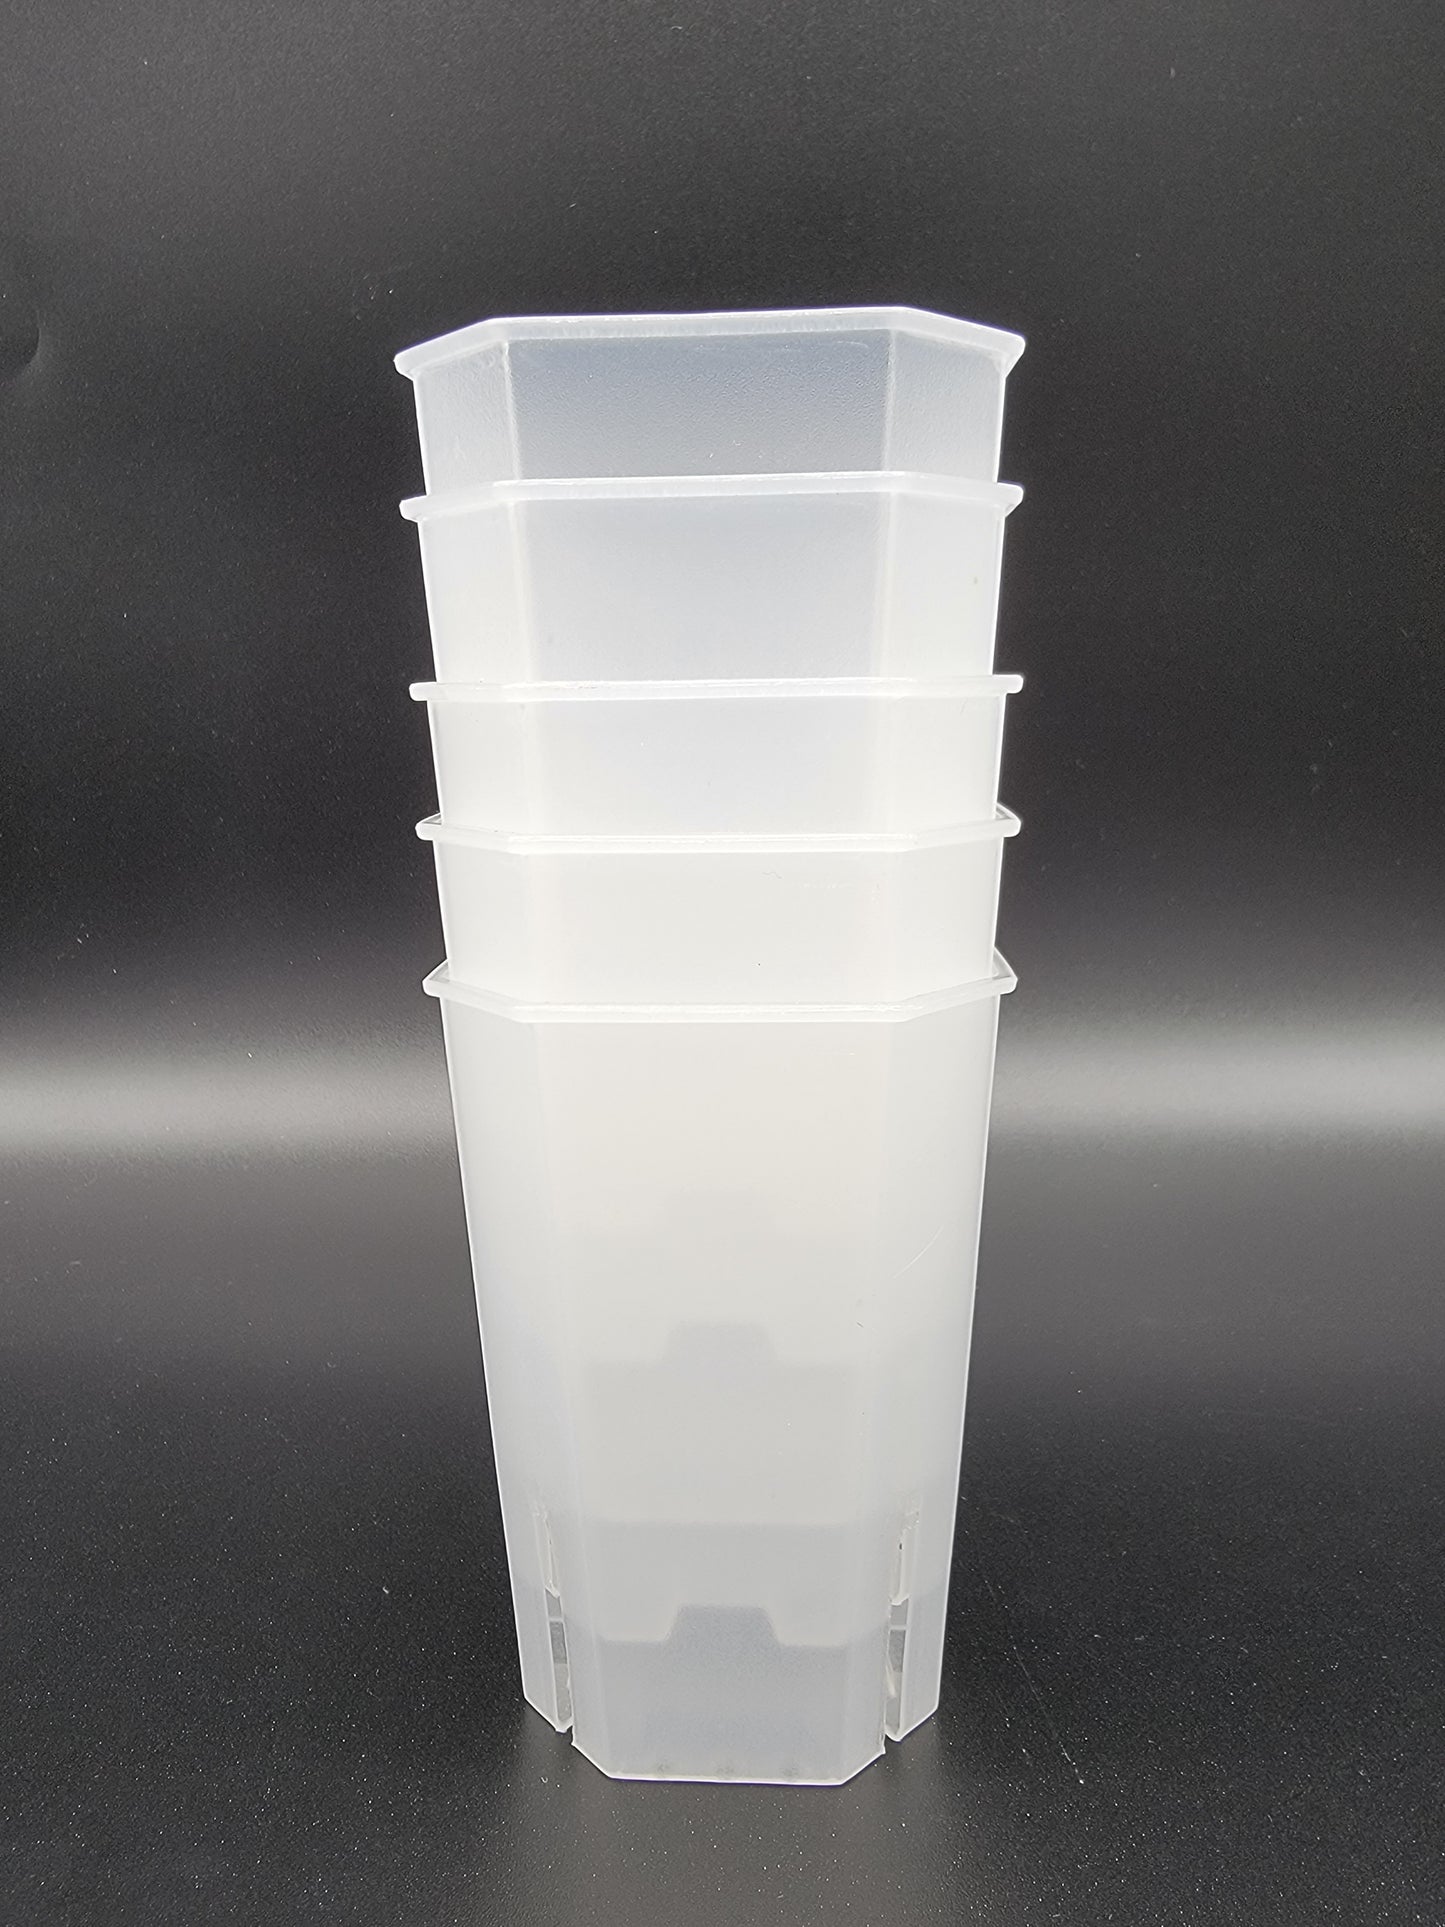 3" Translucent Square Pot - Sturdy and Reusable